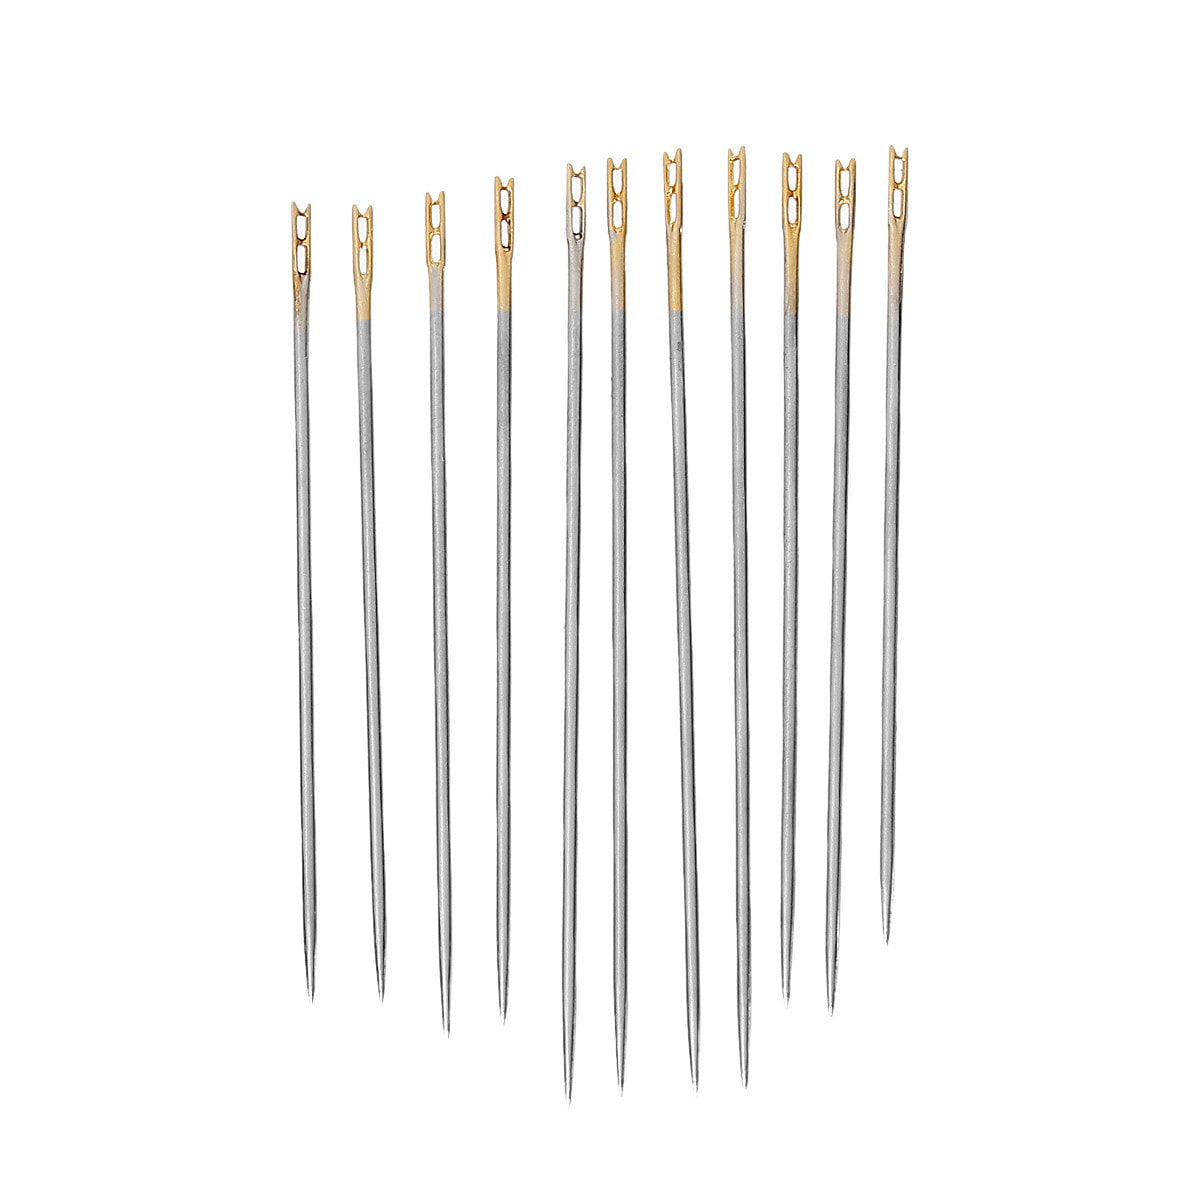 EXCEART 2 Sets Yarns Tool Needle Sewing Pin Crafts Sewing Needles Cross  Stitchery Needles DIY Hand Quilting Needles Thread Sewing Needles Yarn  Sewing